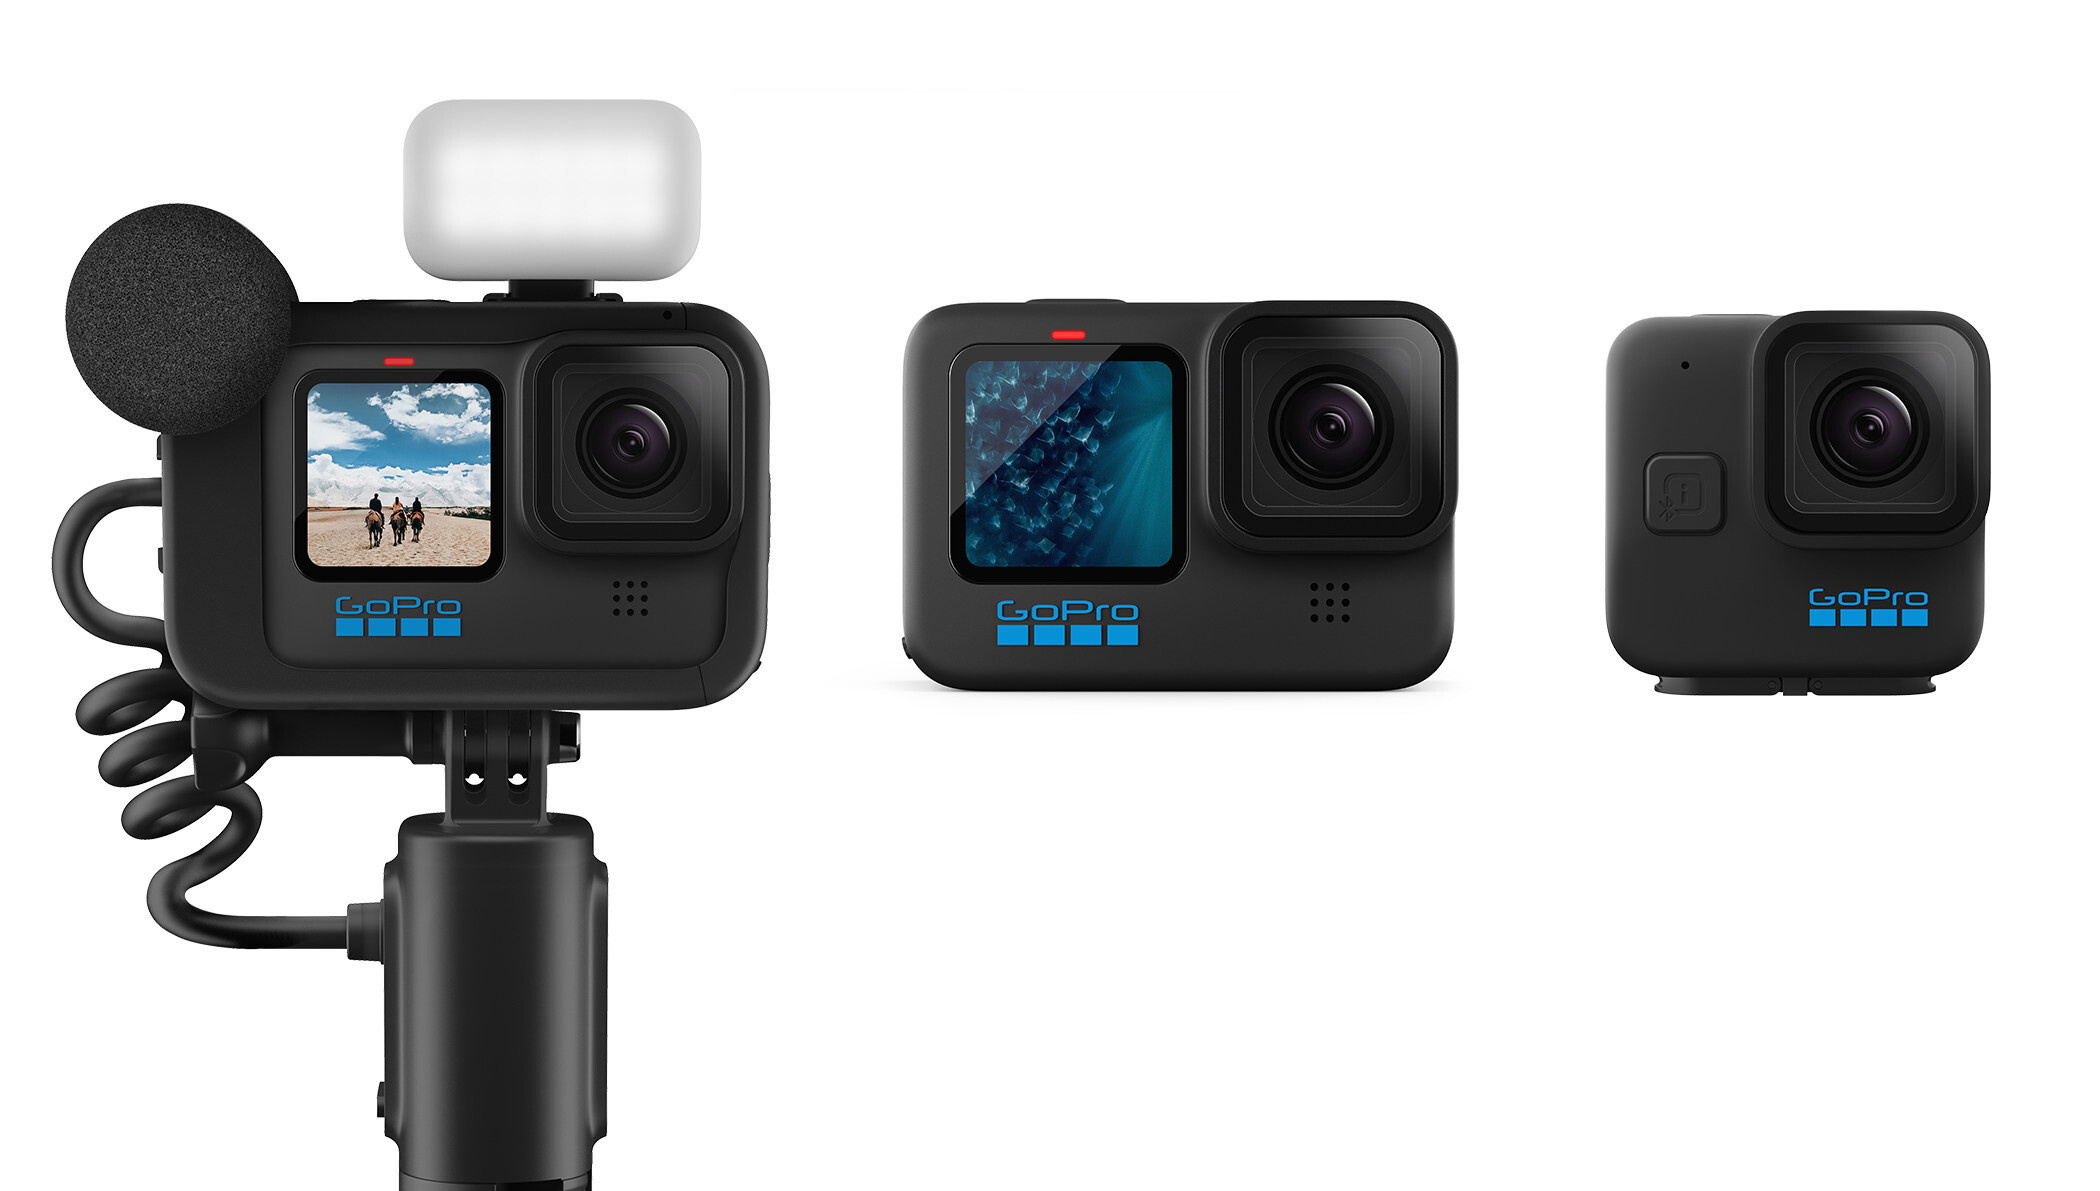 GoPro Hero 12 Review: 27 MP Sensor, Camera, Features, And More